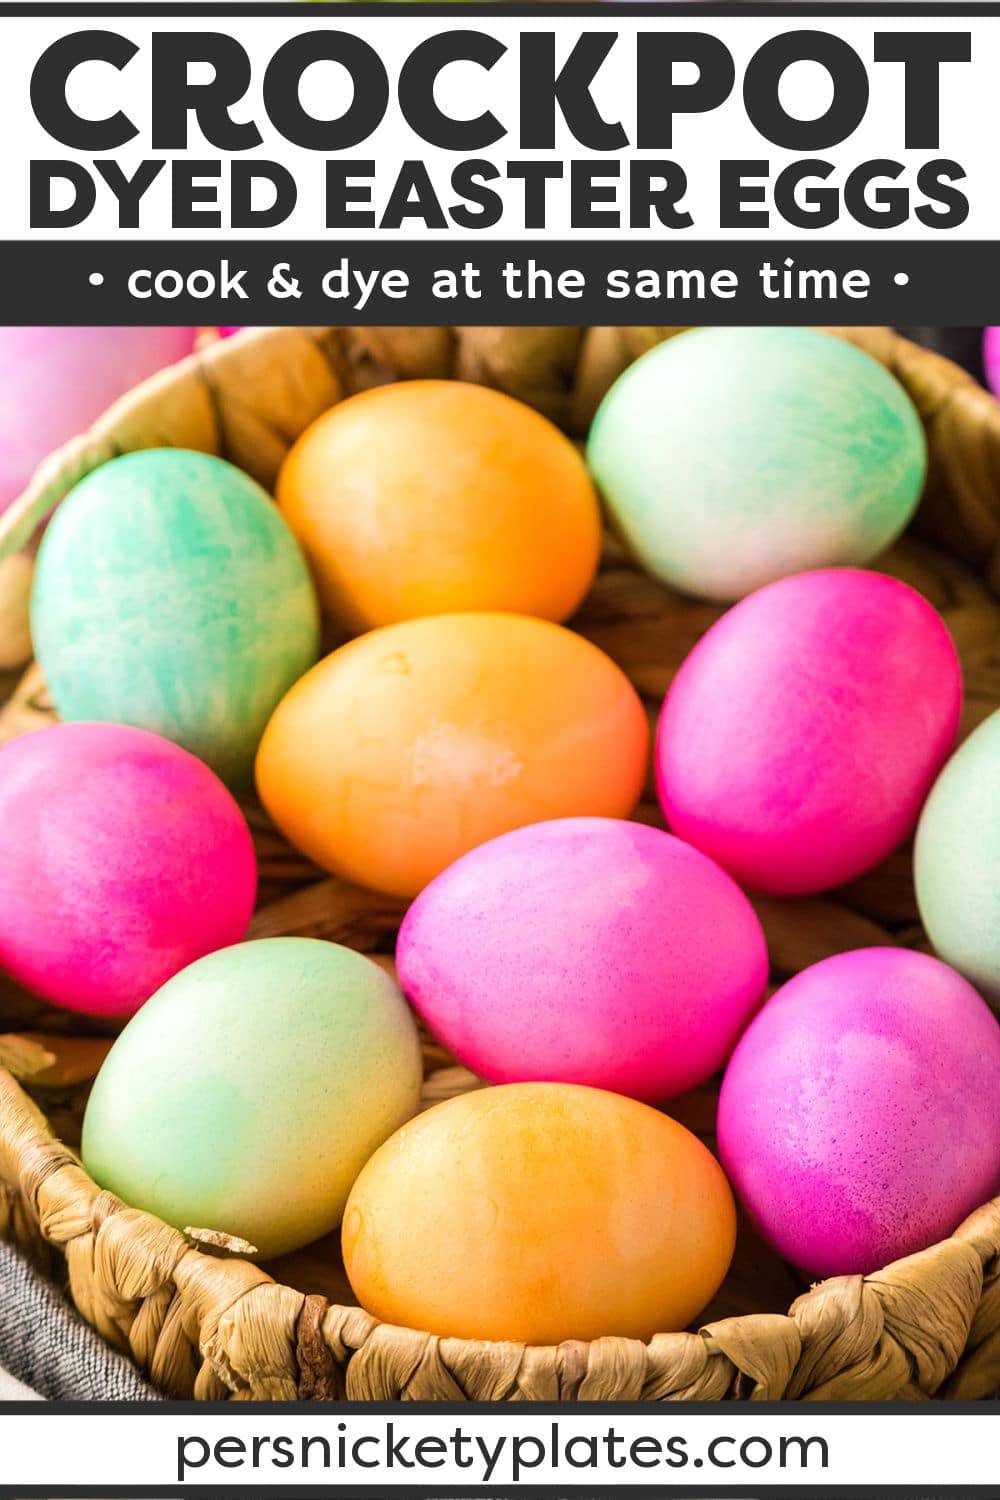 Slow cooker dyed Easter eggs are an efficient way to dye a large batch in a variety of colors at once, all while they are being hard-boiled to perfection! Grab some eggs, water, food coloring, and your crockpot and you're on your way to a batch of beautifully vibrant Easter eggs ready to eat or use as a table centerpiece. All without dye ever touching your hands! | www.persnicketyplates.com